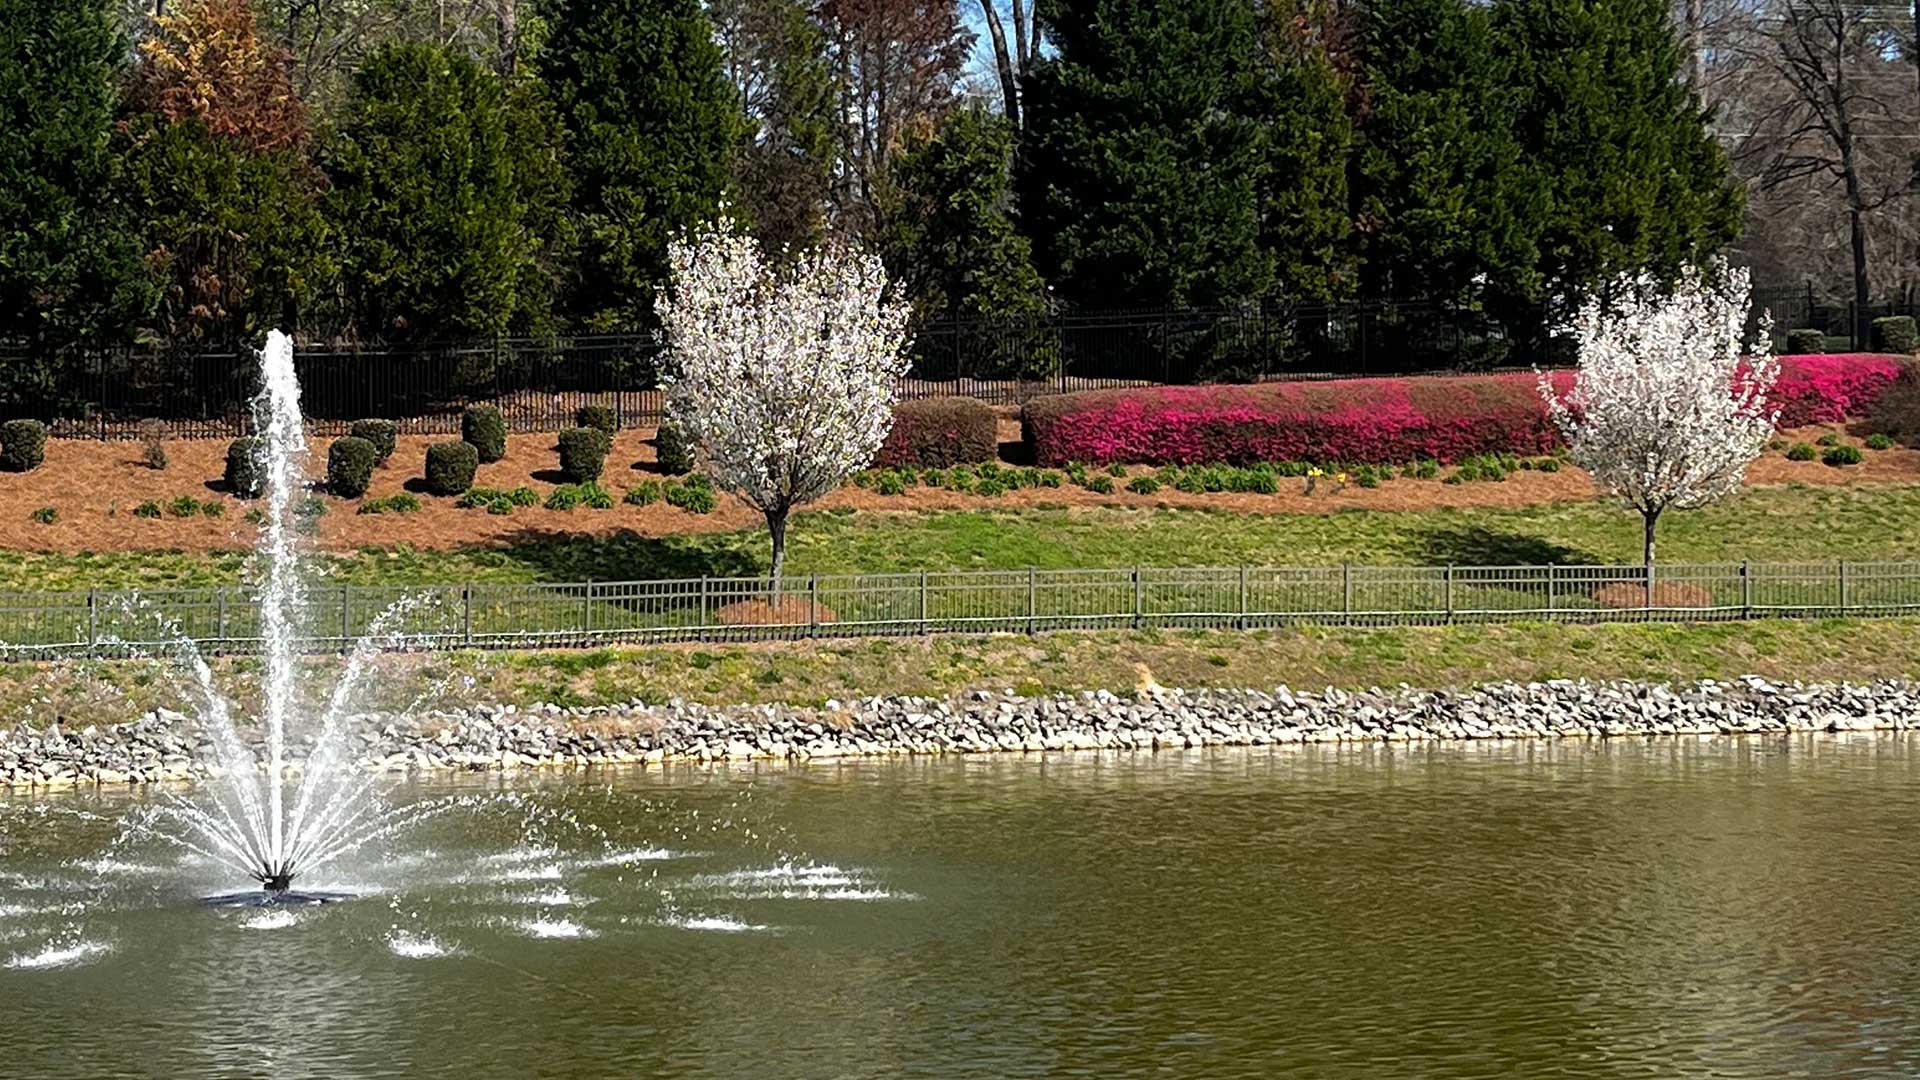 Landscaping around a beautiful pond the includes nicely maintained shrubs, plants, and trees.